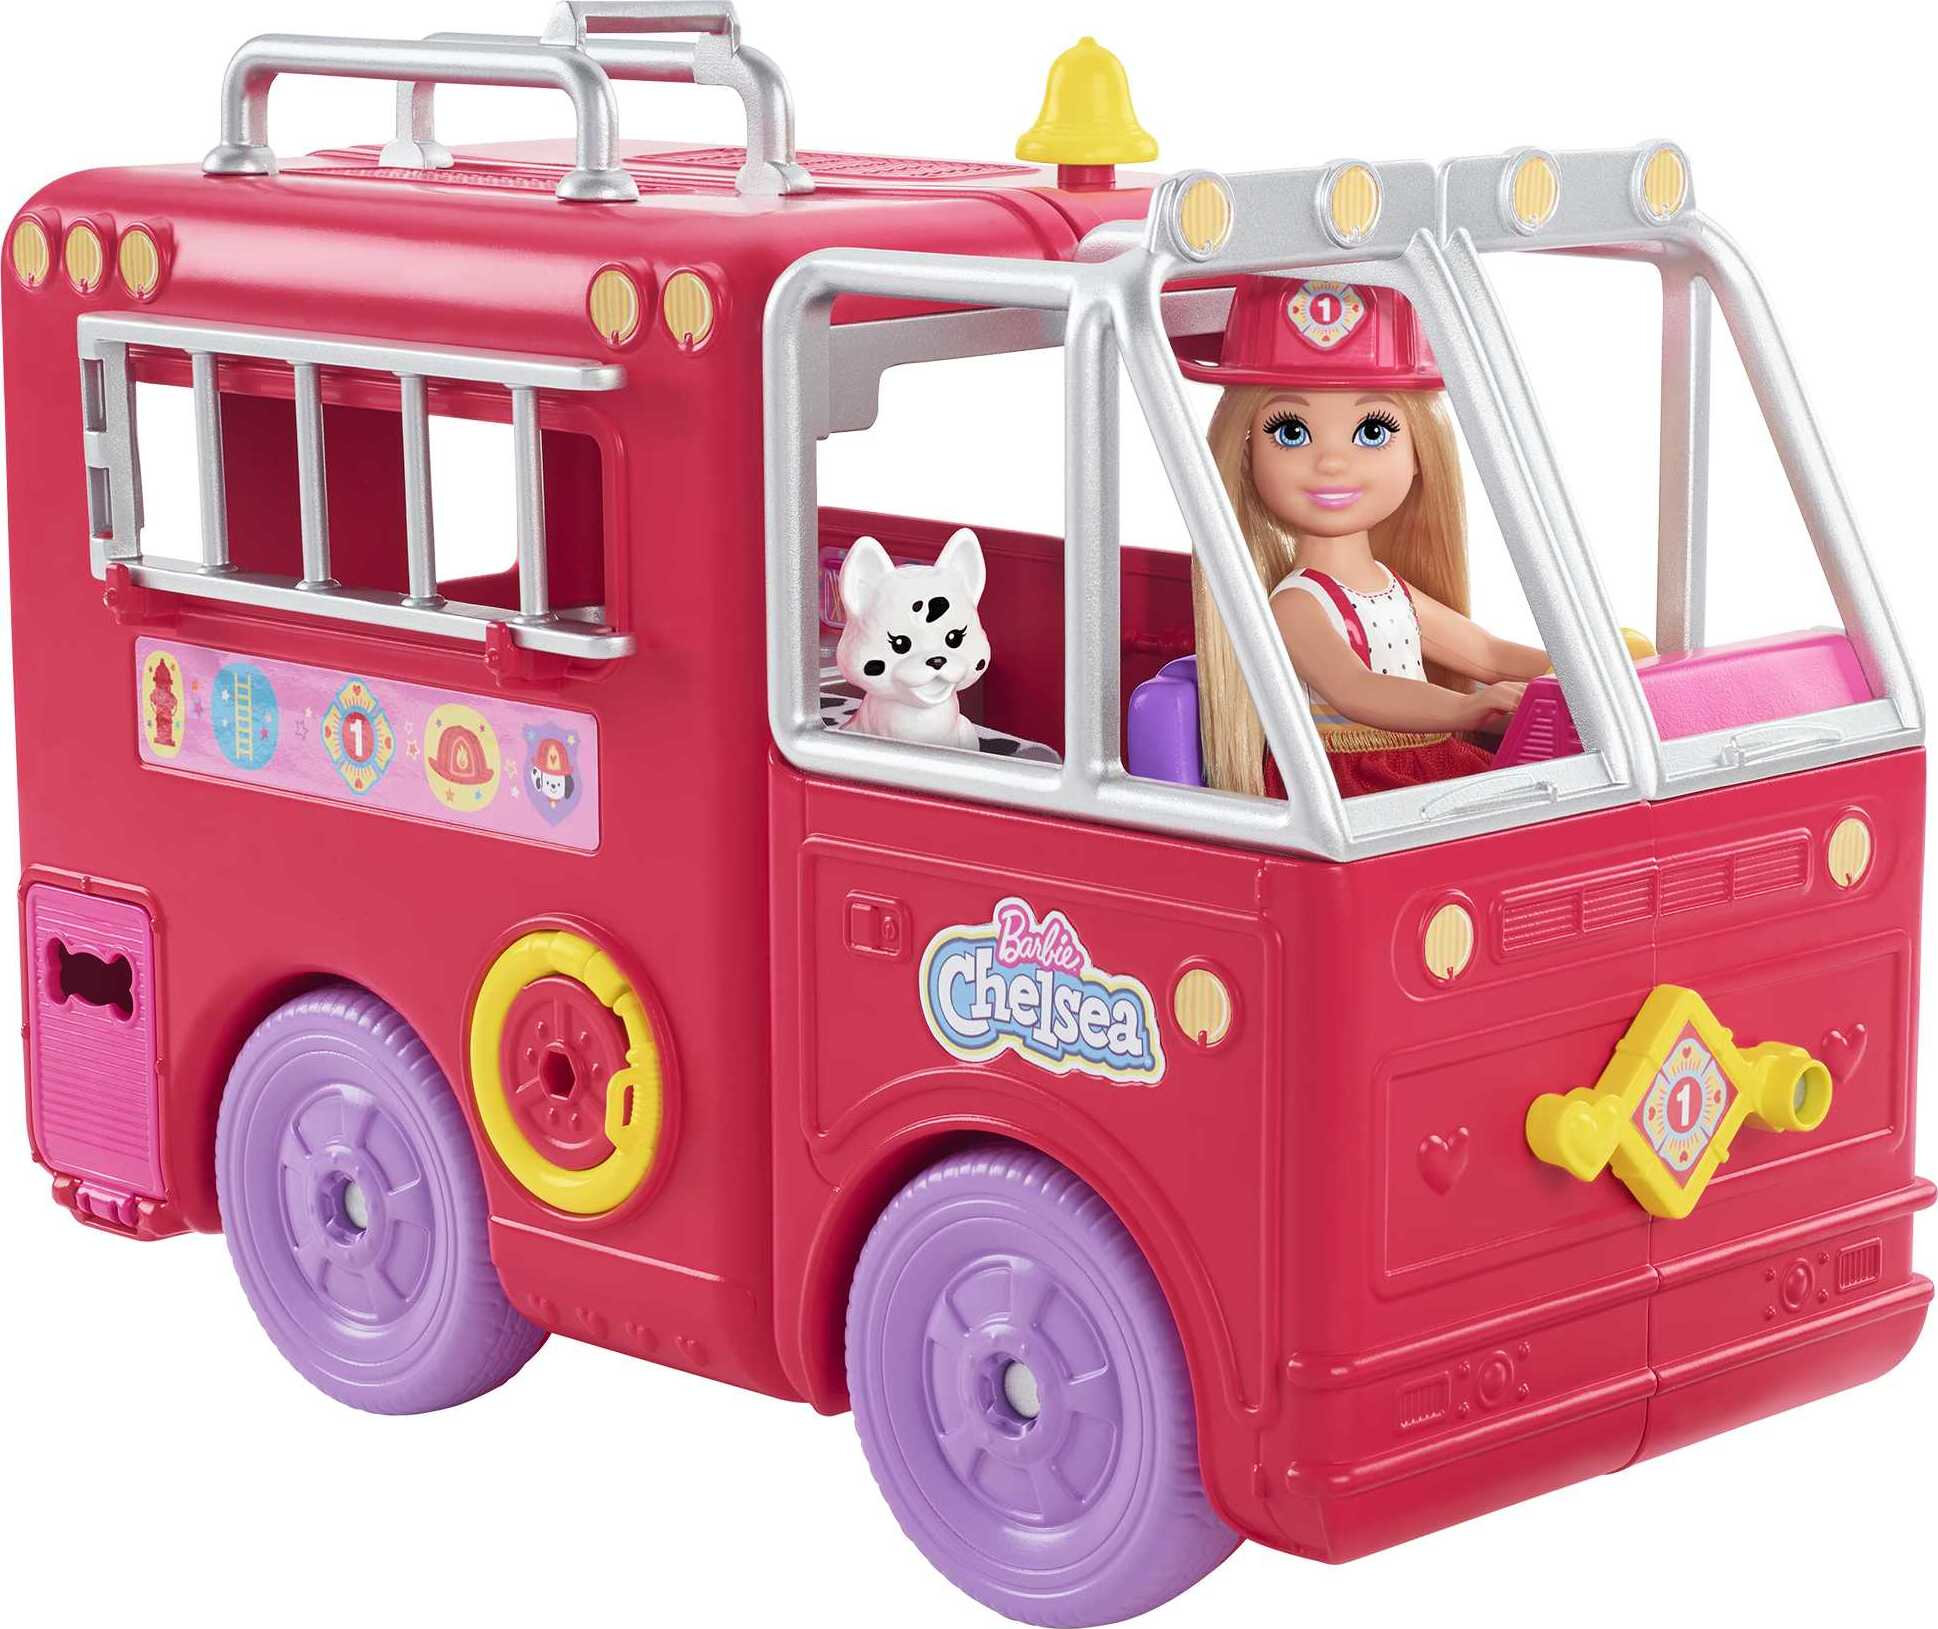 Barbie Chelsea Can Be Fire Truck Playset with Blonde Doll, 2 Pets & 15+ Accessories, Open for Station - image 1 of 7